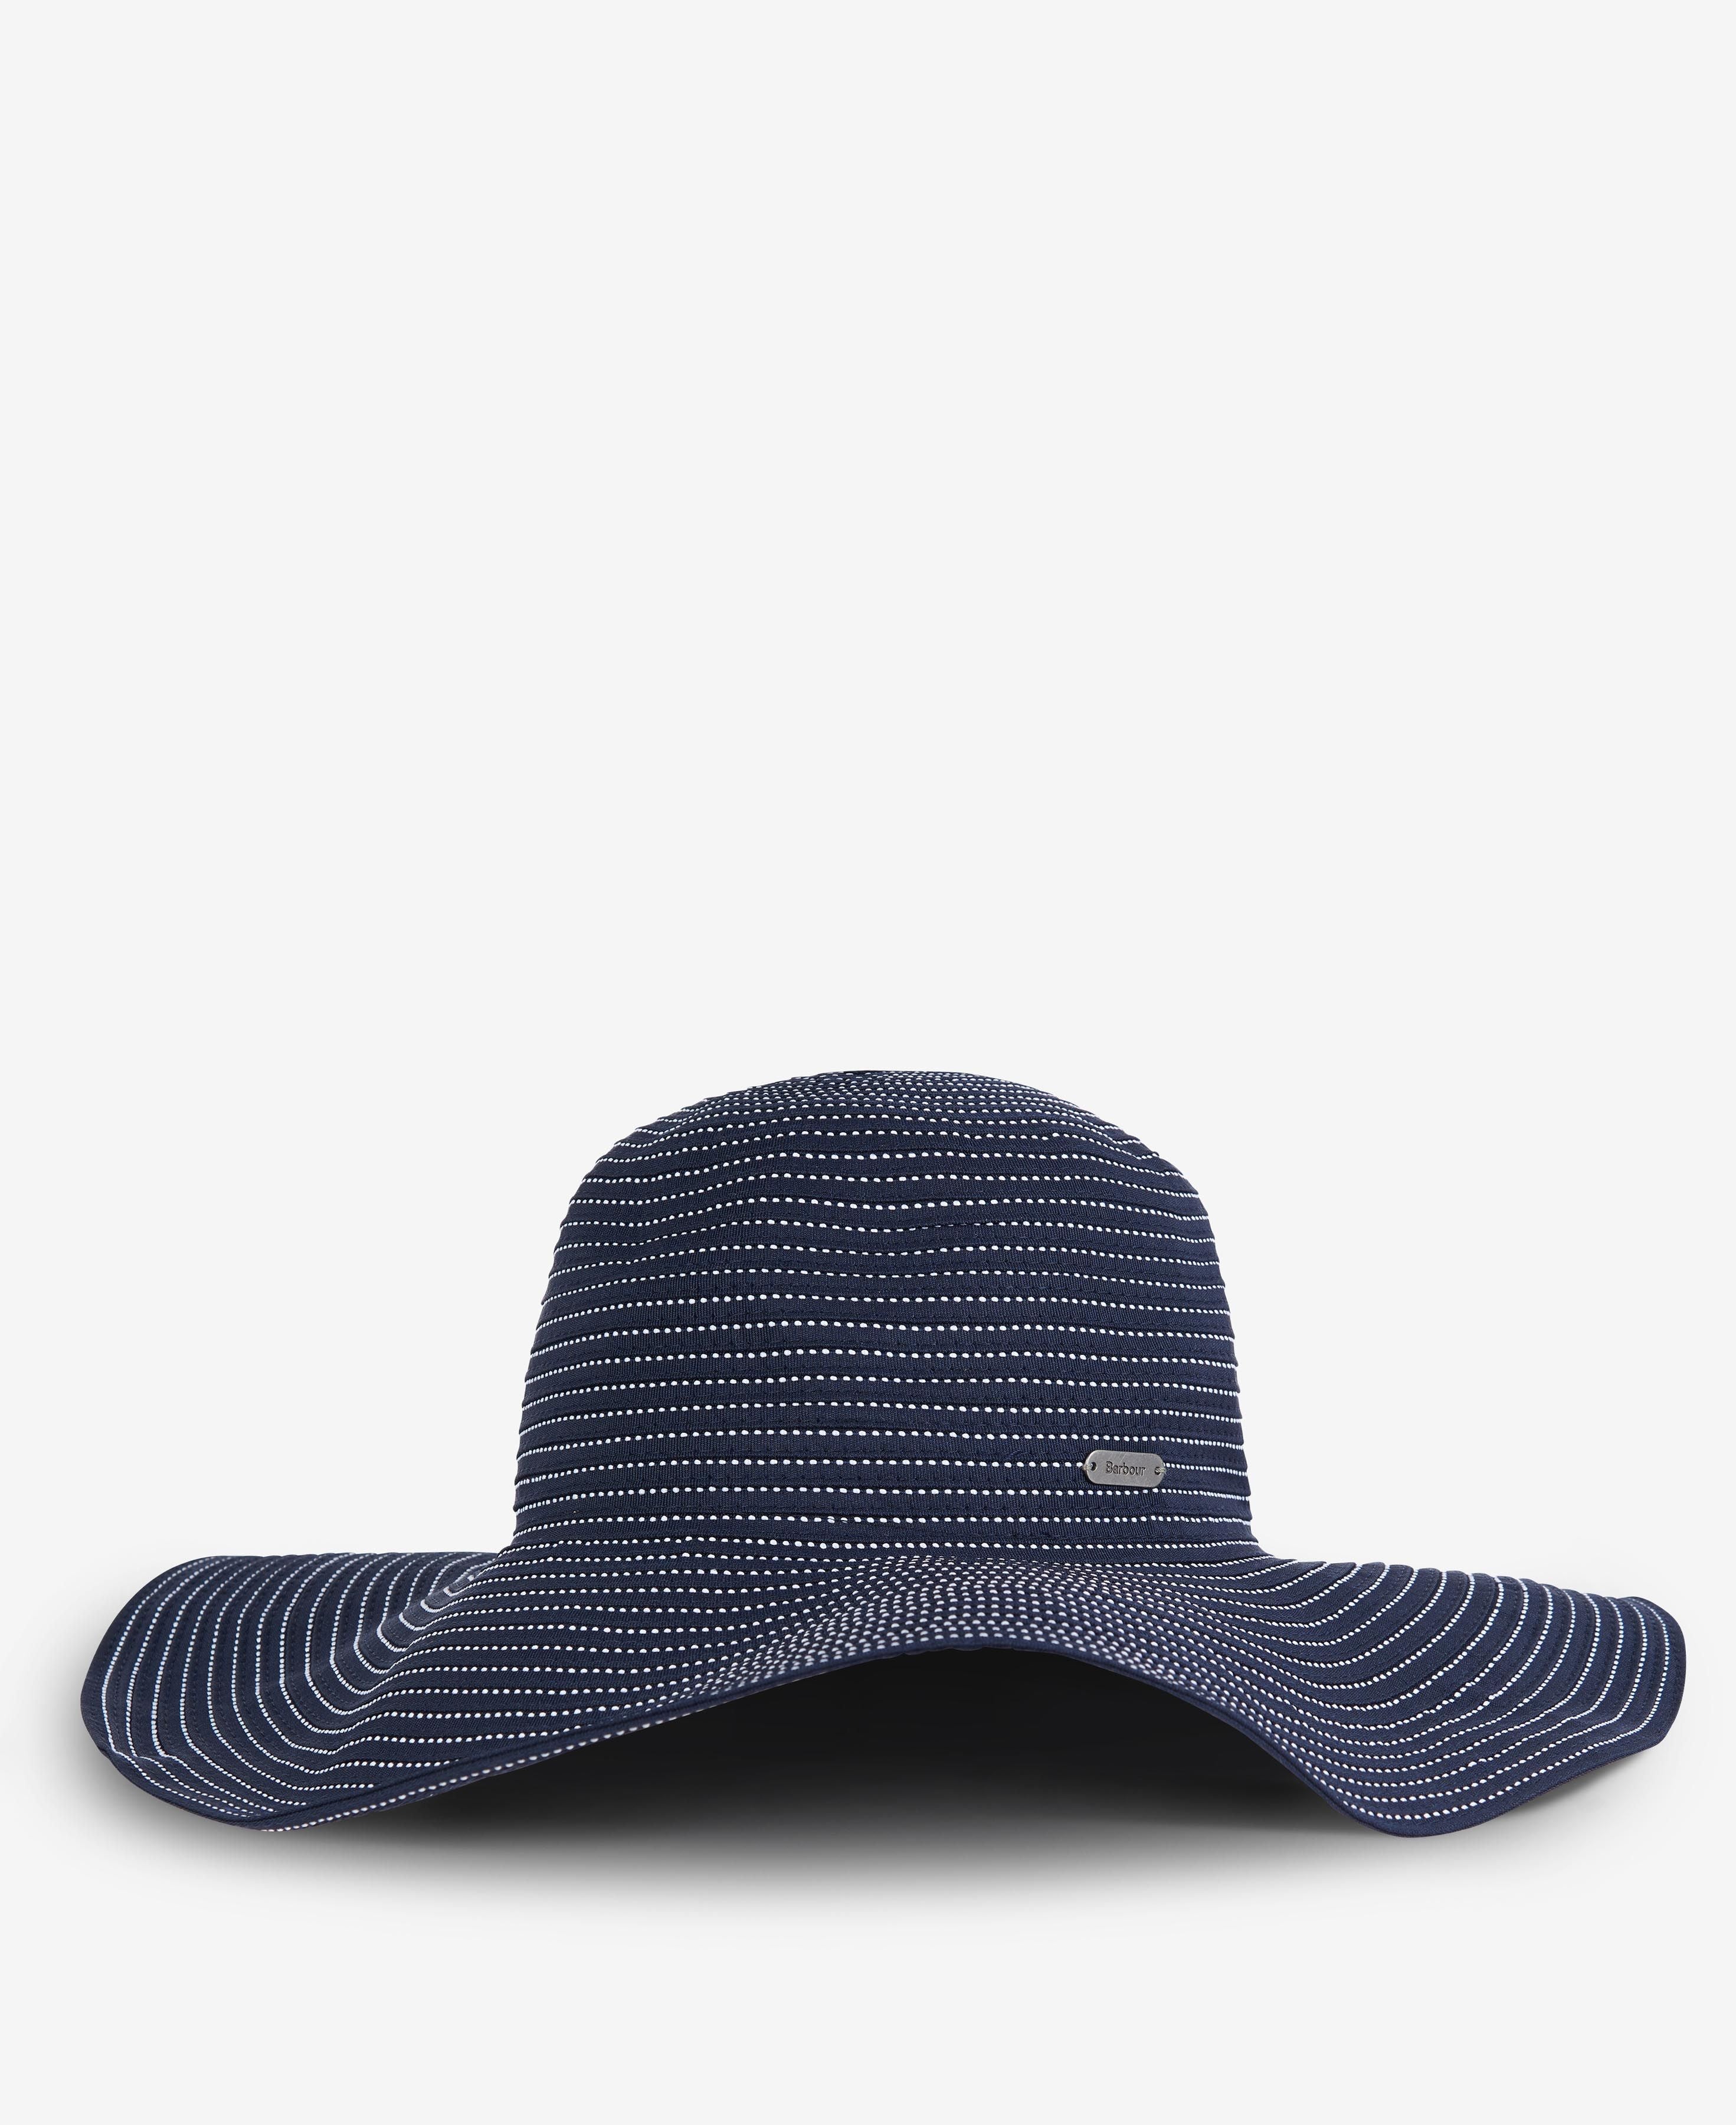 Barbour Lyndale Packable Hat - Classic Navy